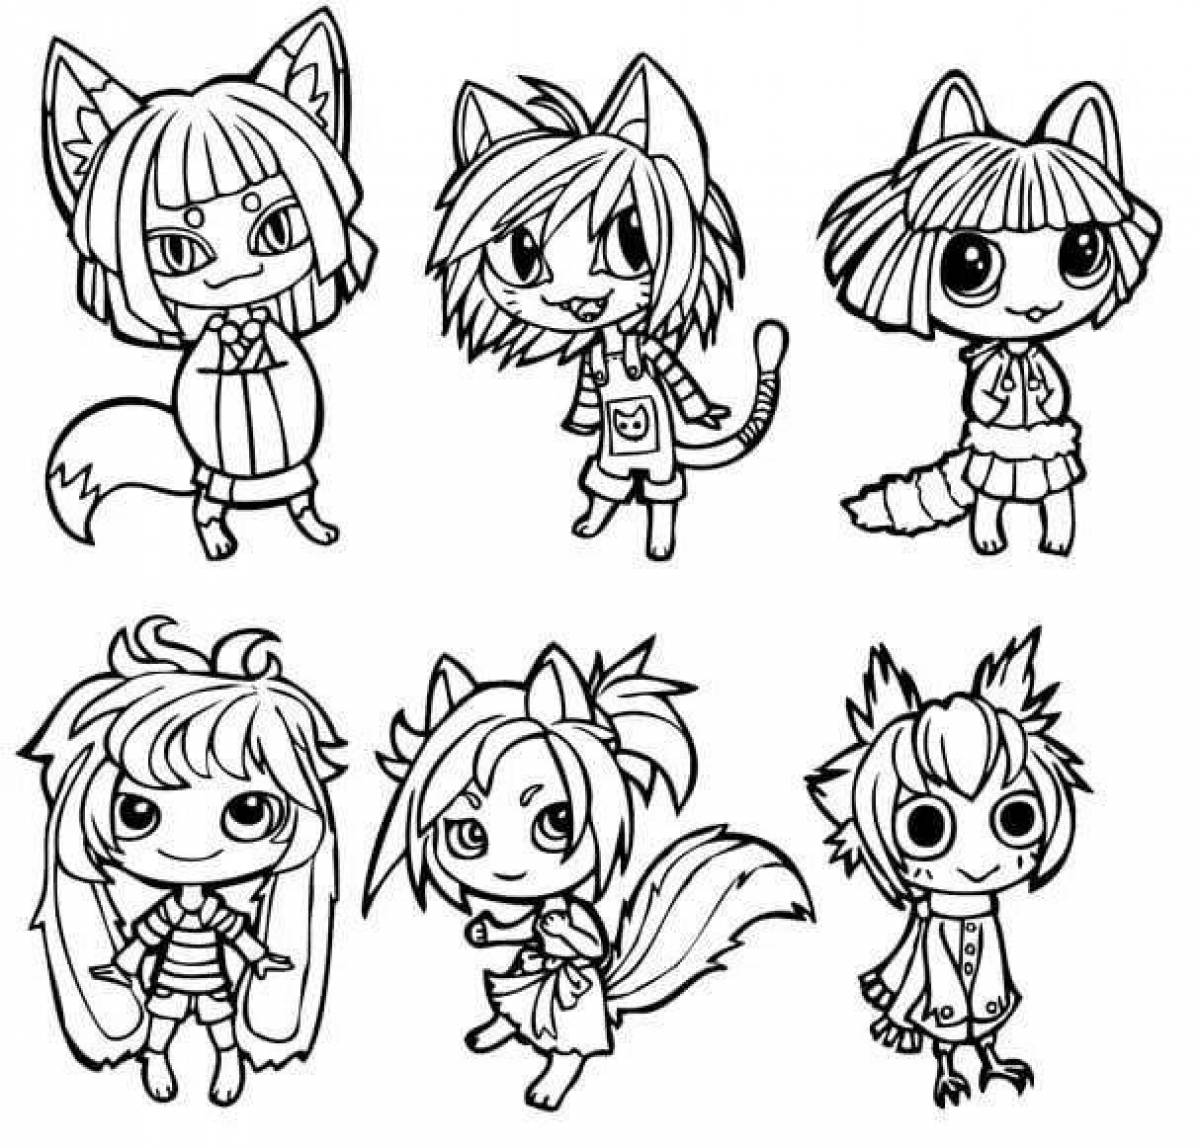 Bright chibi maker coloring page